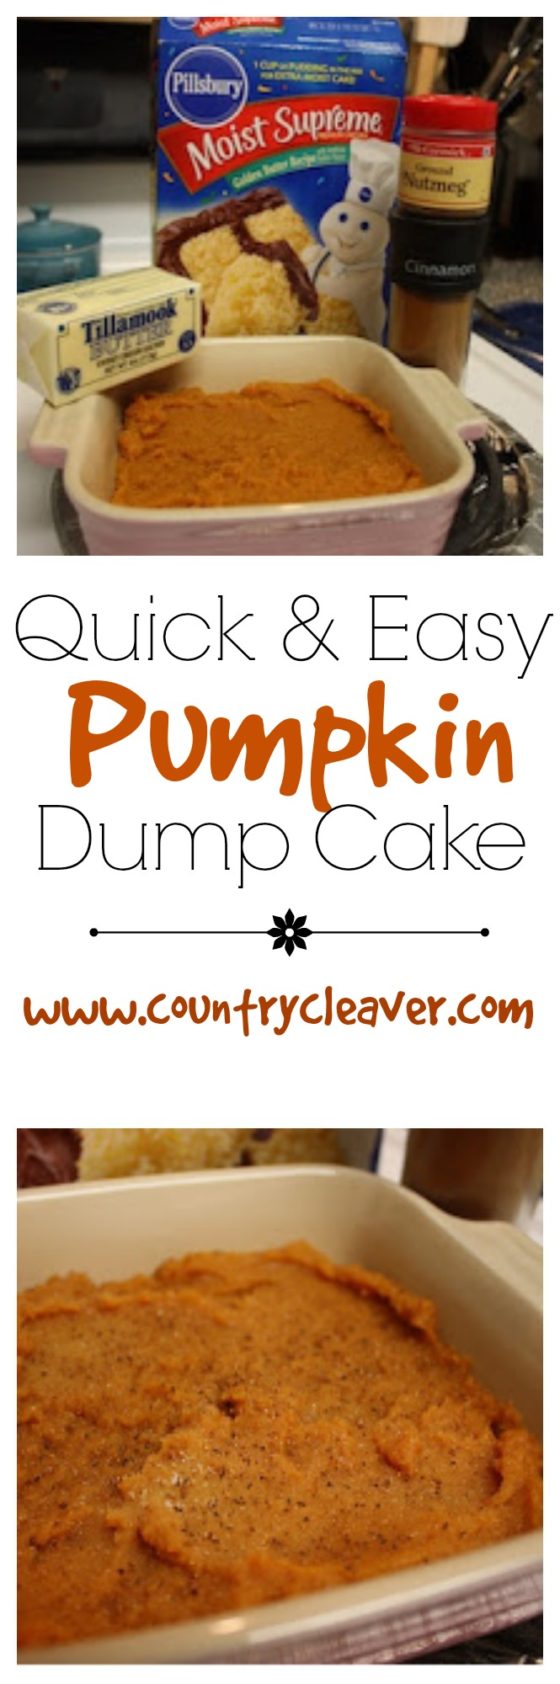 Quick and Easy Pumpkin Dump Cake - www.countrycleaver.com